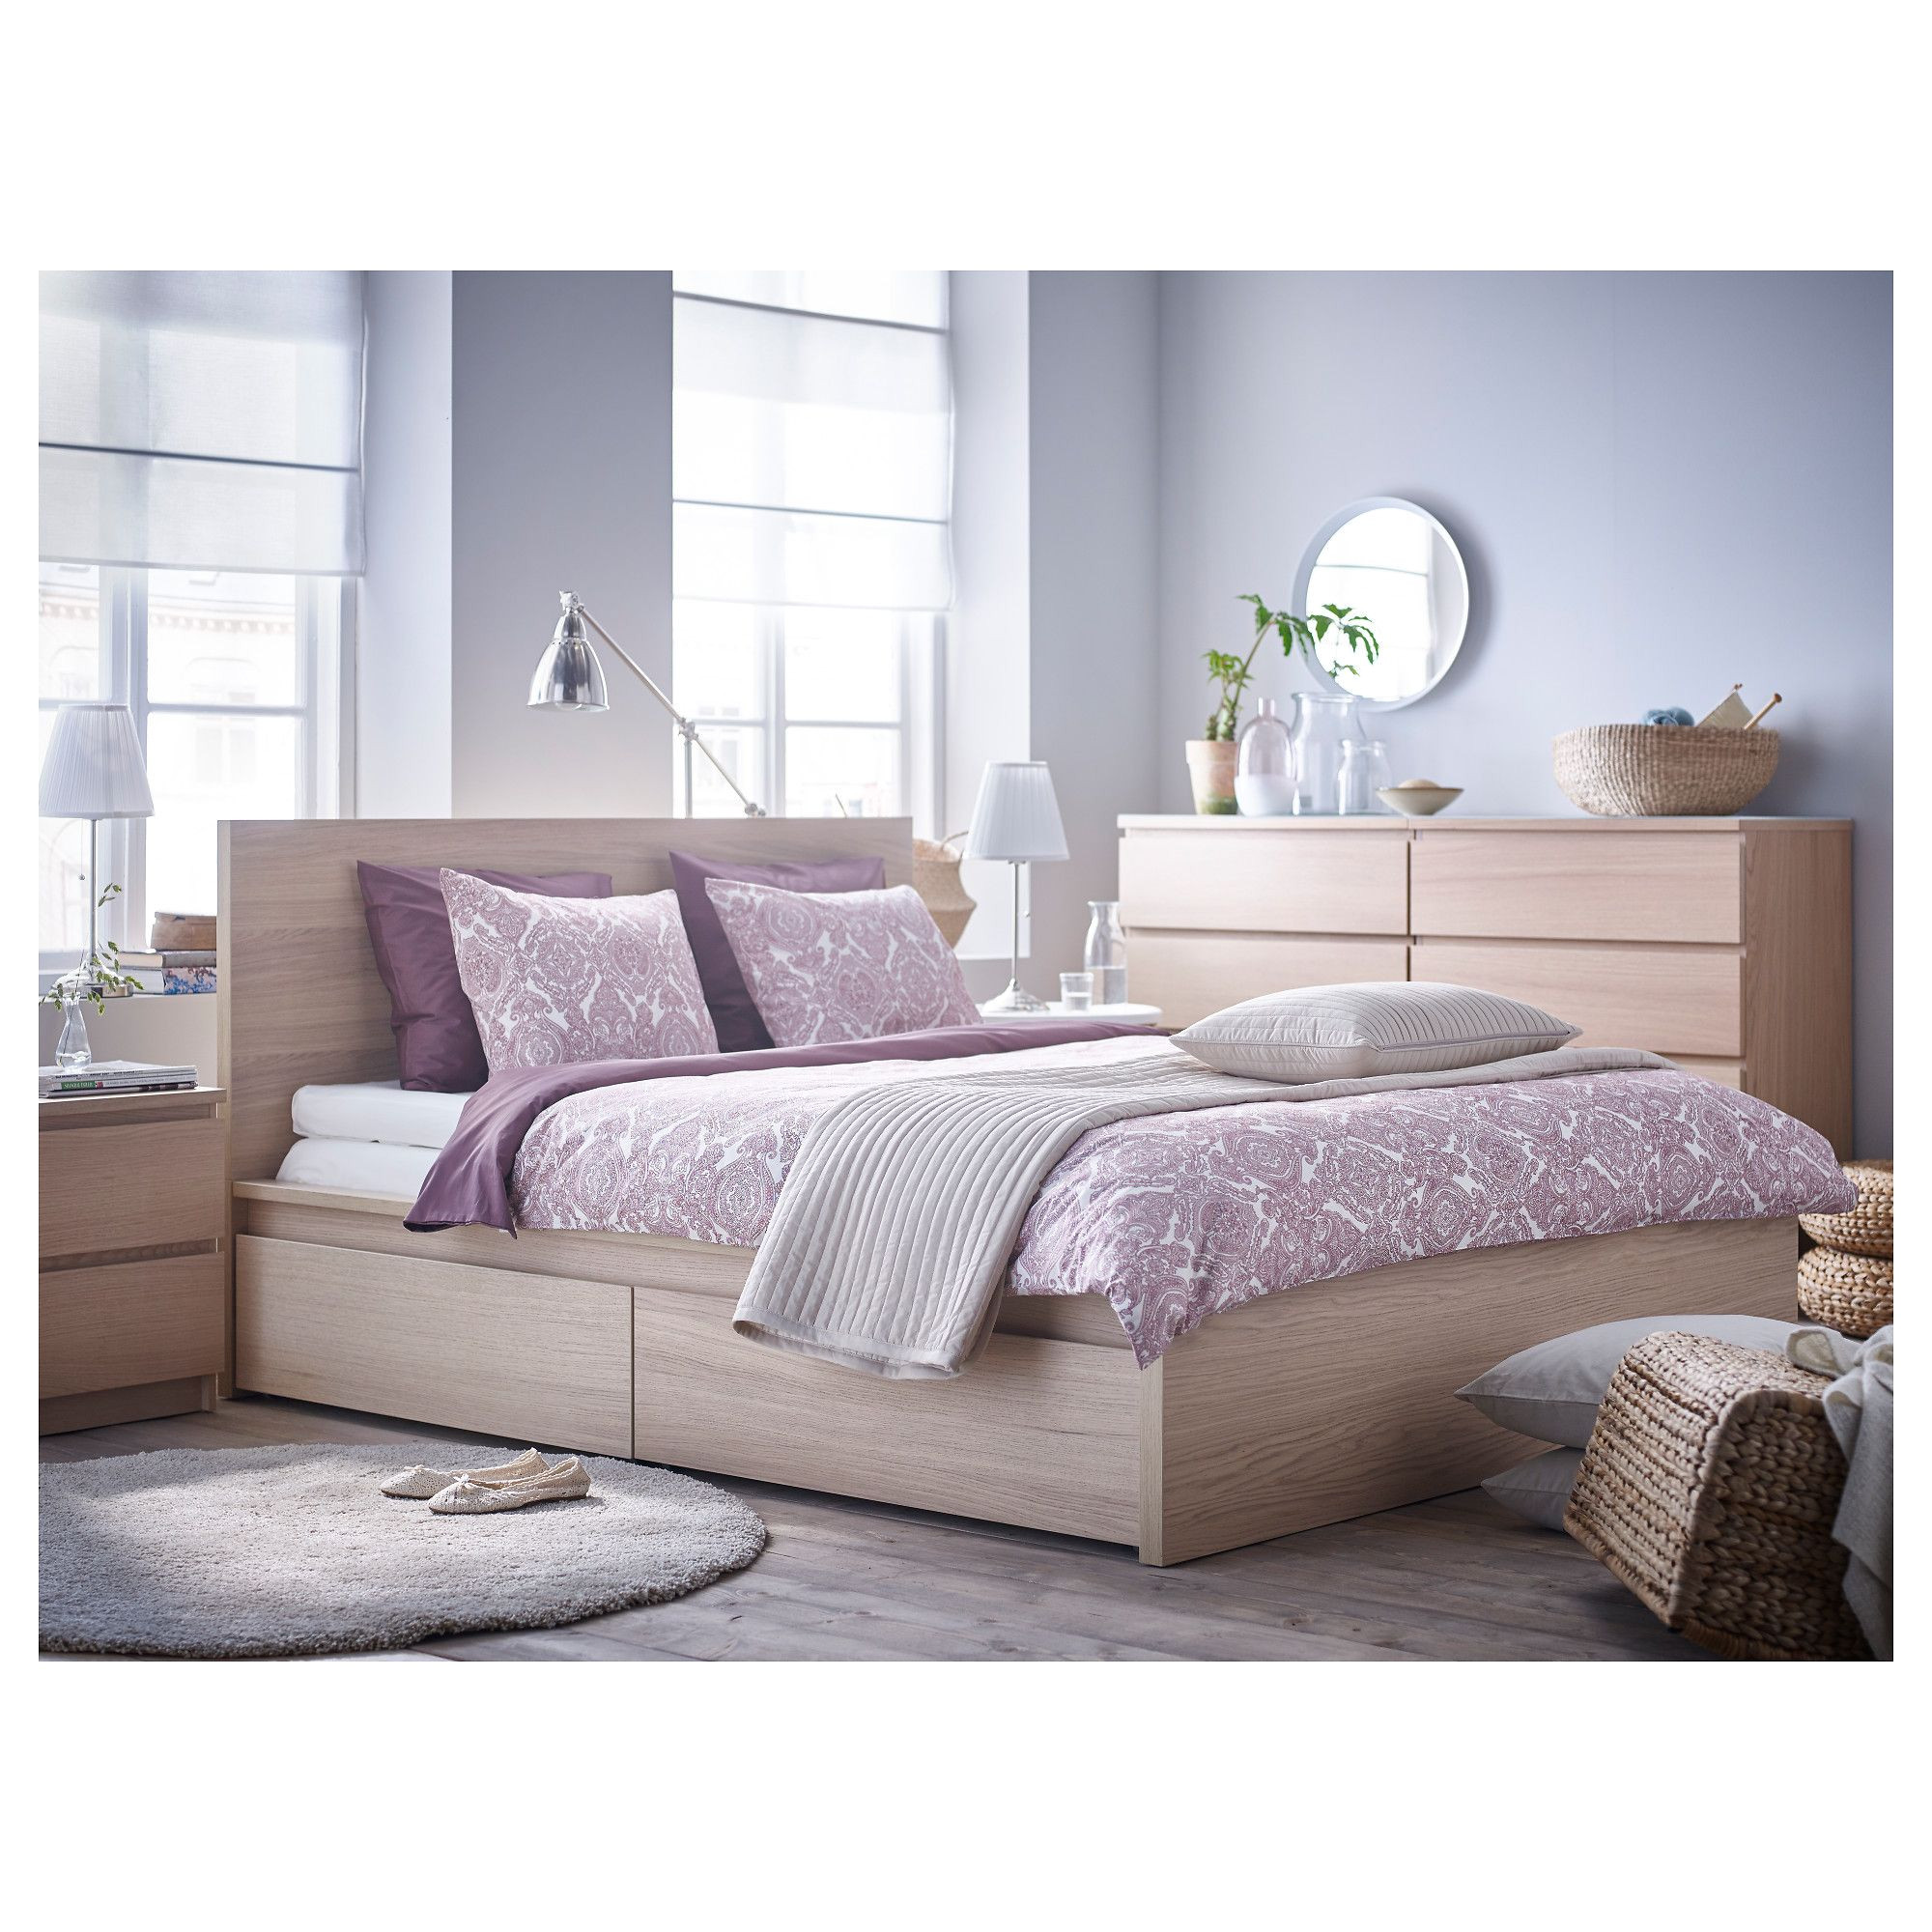 ikea malm high bed frame 2 storage boxes queen luroy the 2 large drawers on casters give you an extra storage space under the bed